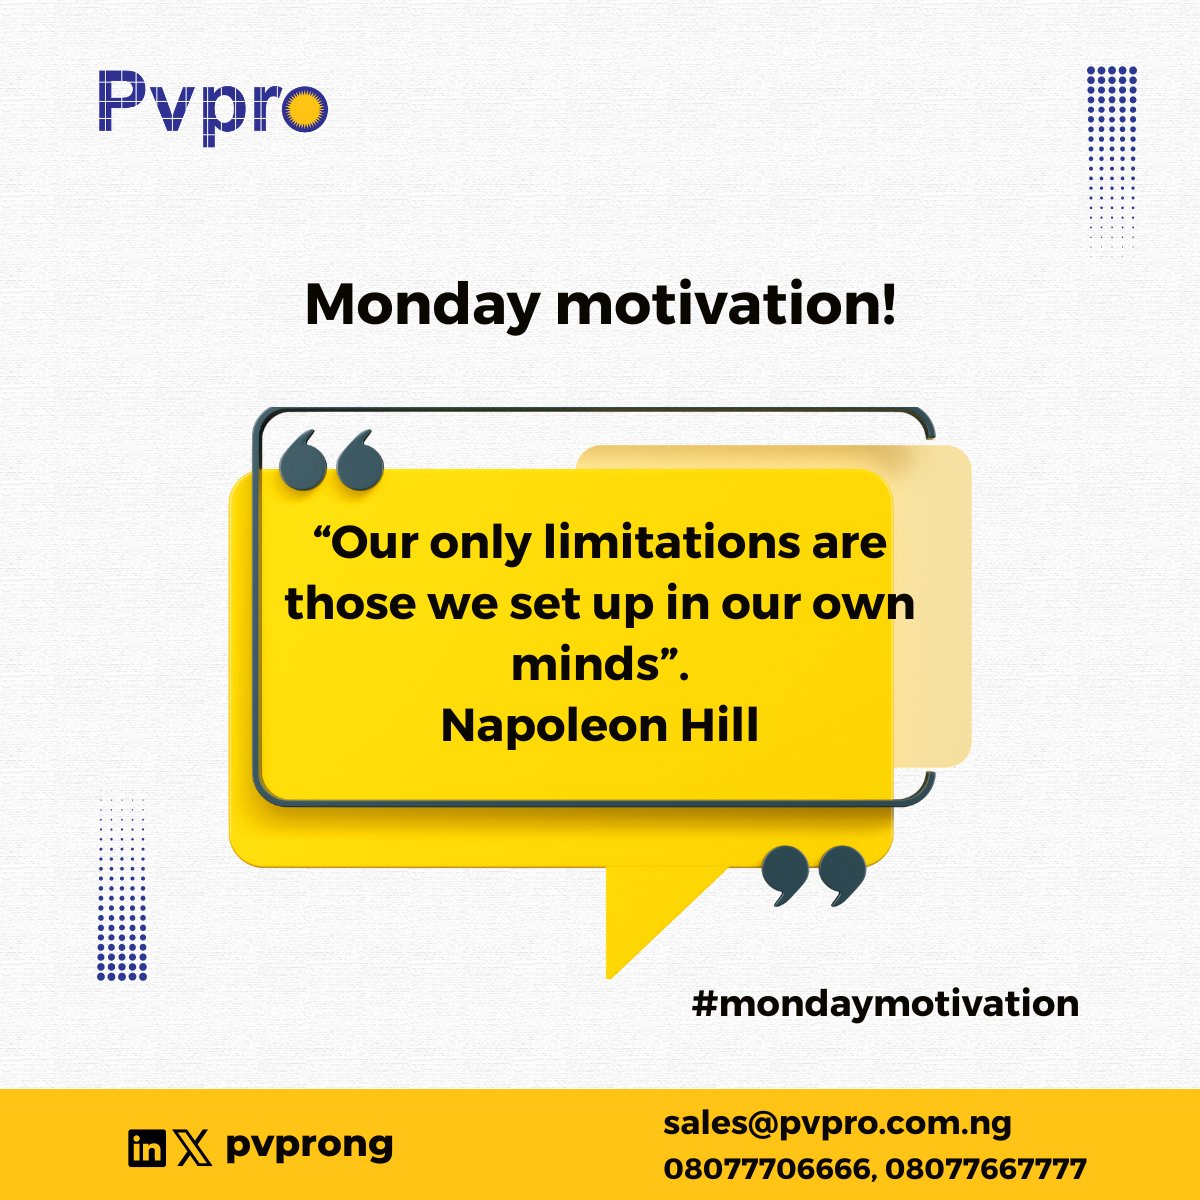 'Our only limitations are those we set up in our own minds.' Napoleon Hill
Happy new week! Do not let your mind become your limitation.

#mondaymotivation #newweek #pvproenergy enugu #bestsolarcompanyinlagos wizkid #solarinstallationcompany #solarpower #solarcompanyinlagos